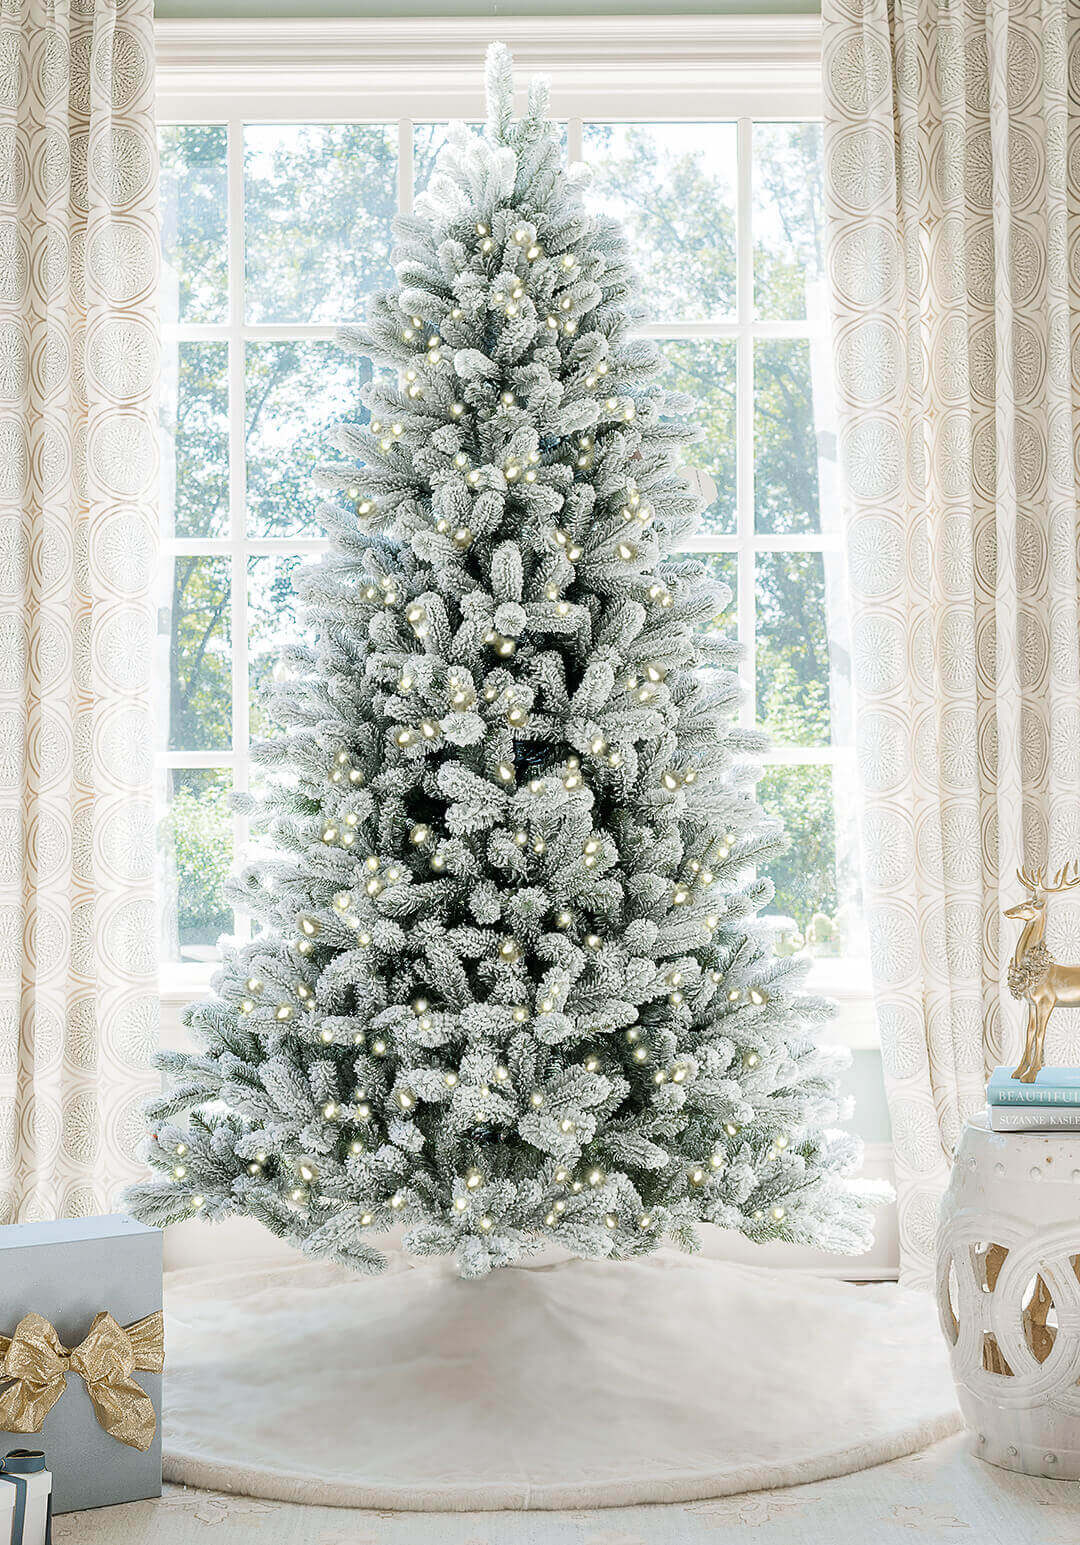 7.5 Feet Pre-Lit Hinged Christmas Tree Snow Flocked with 9 Modes Lights - Color